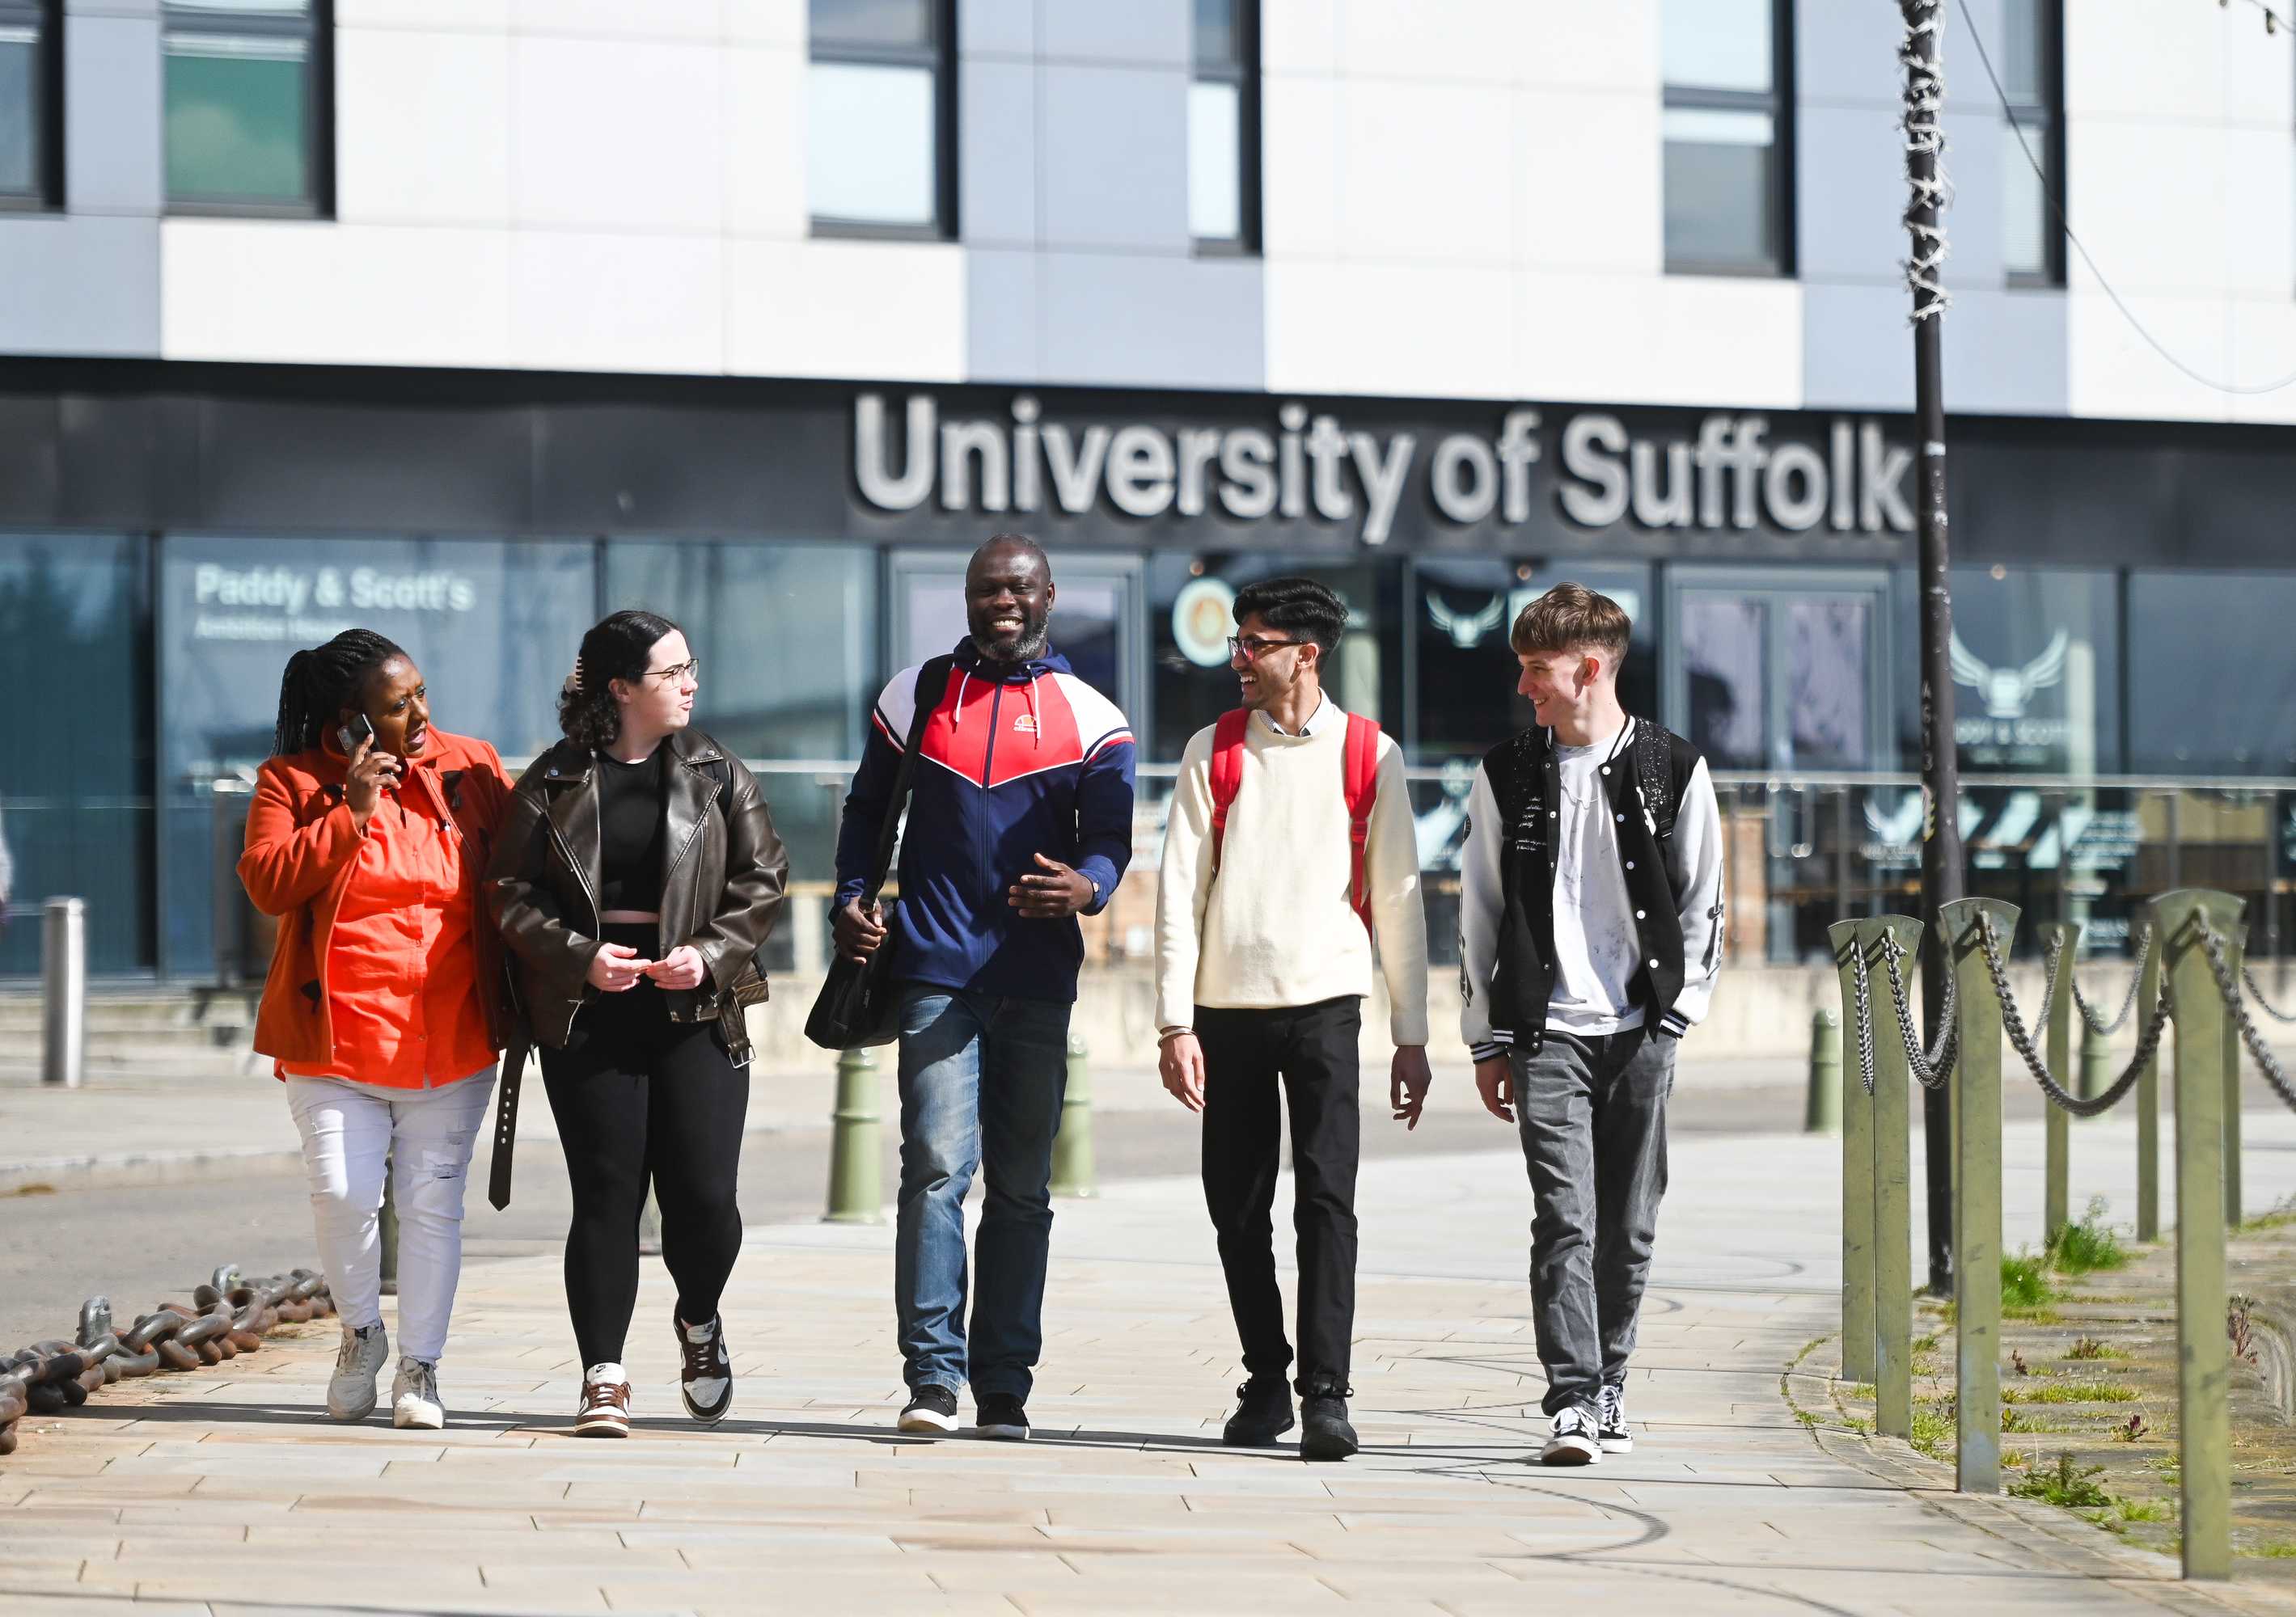 Group of five students chatting and walking in front of the Waterfront Building, with the University of Suffolk building sign behind them.